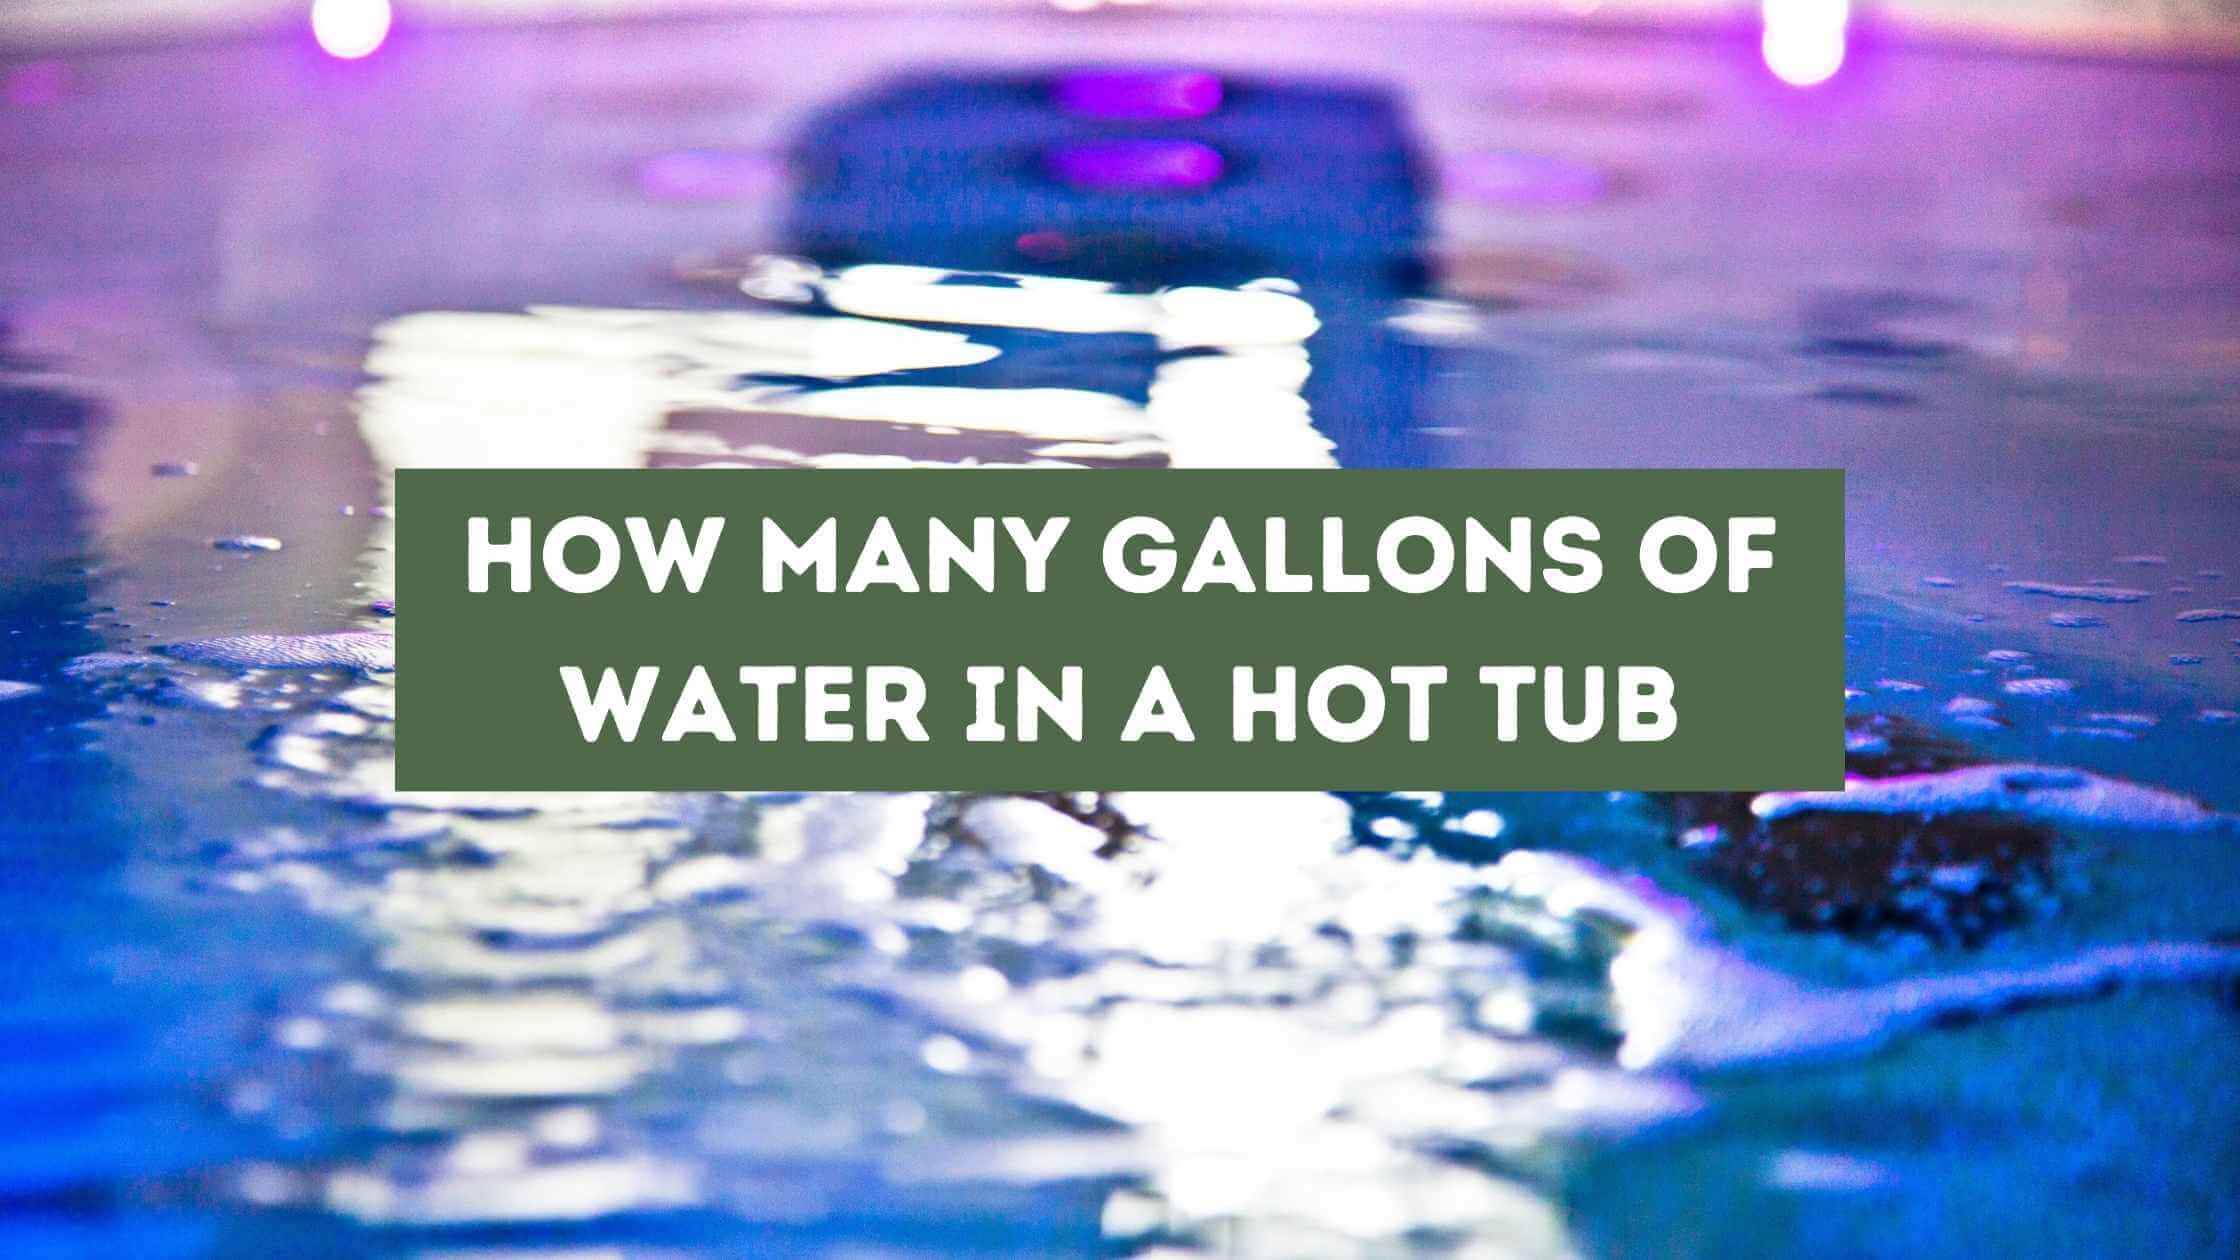 How Many Gallons of Water in a Hot Tub